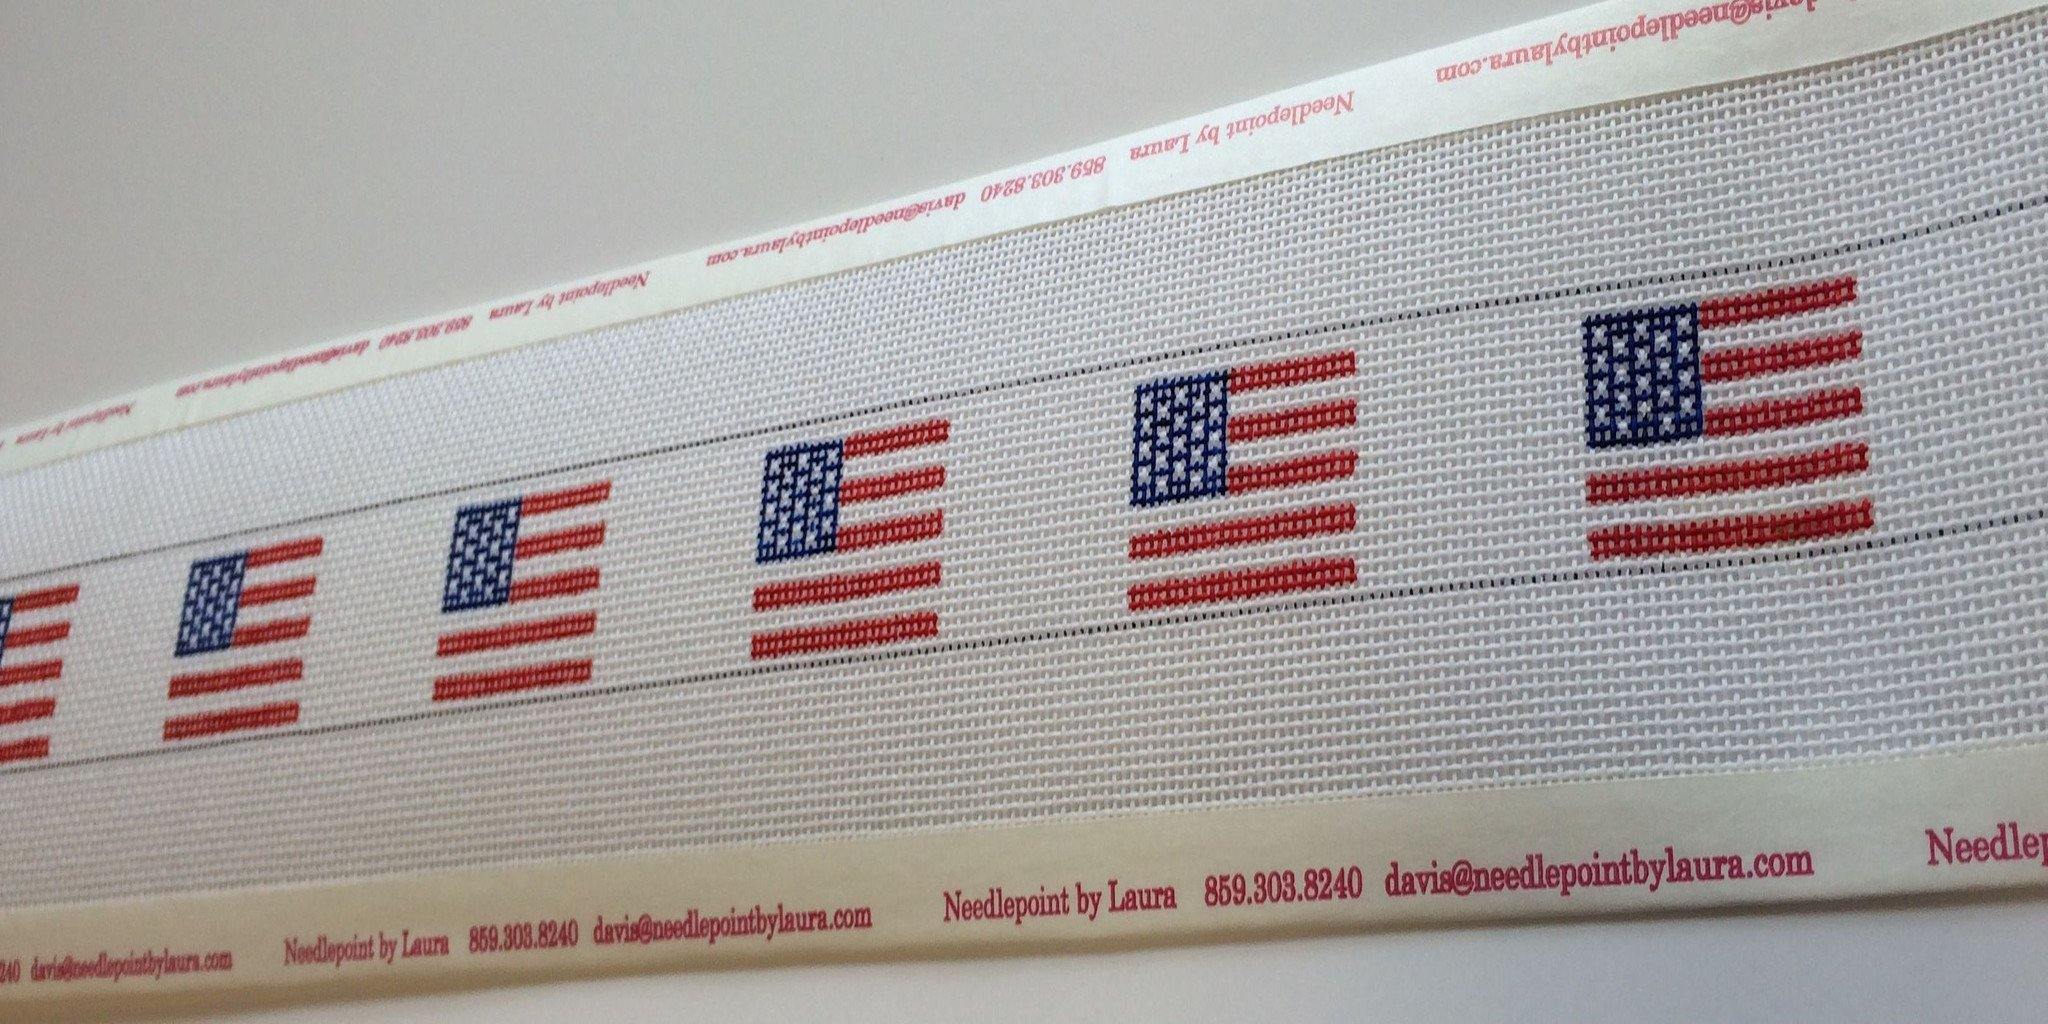 American flag needlepoint belt canvas - Needlepoint by Laura